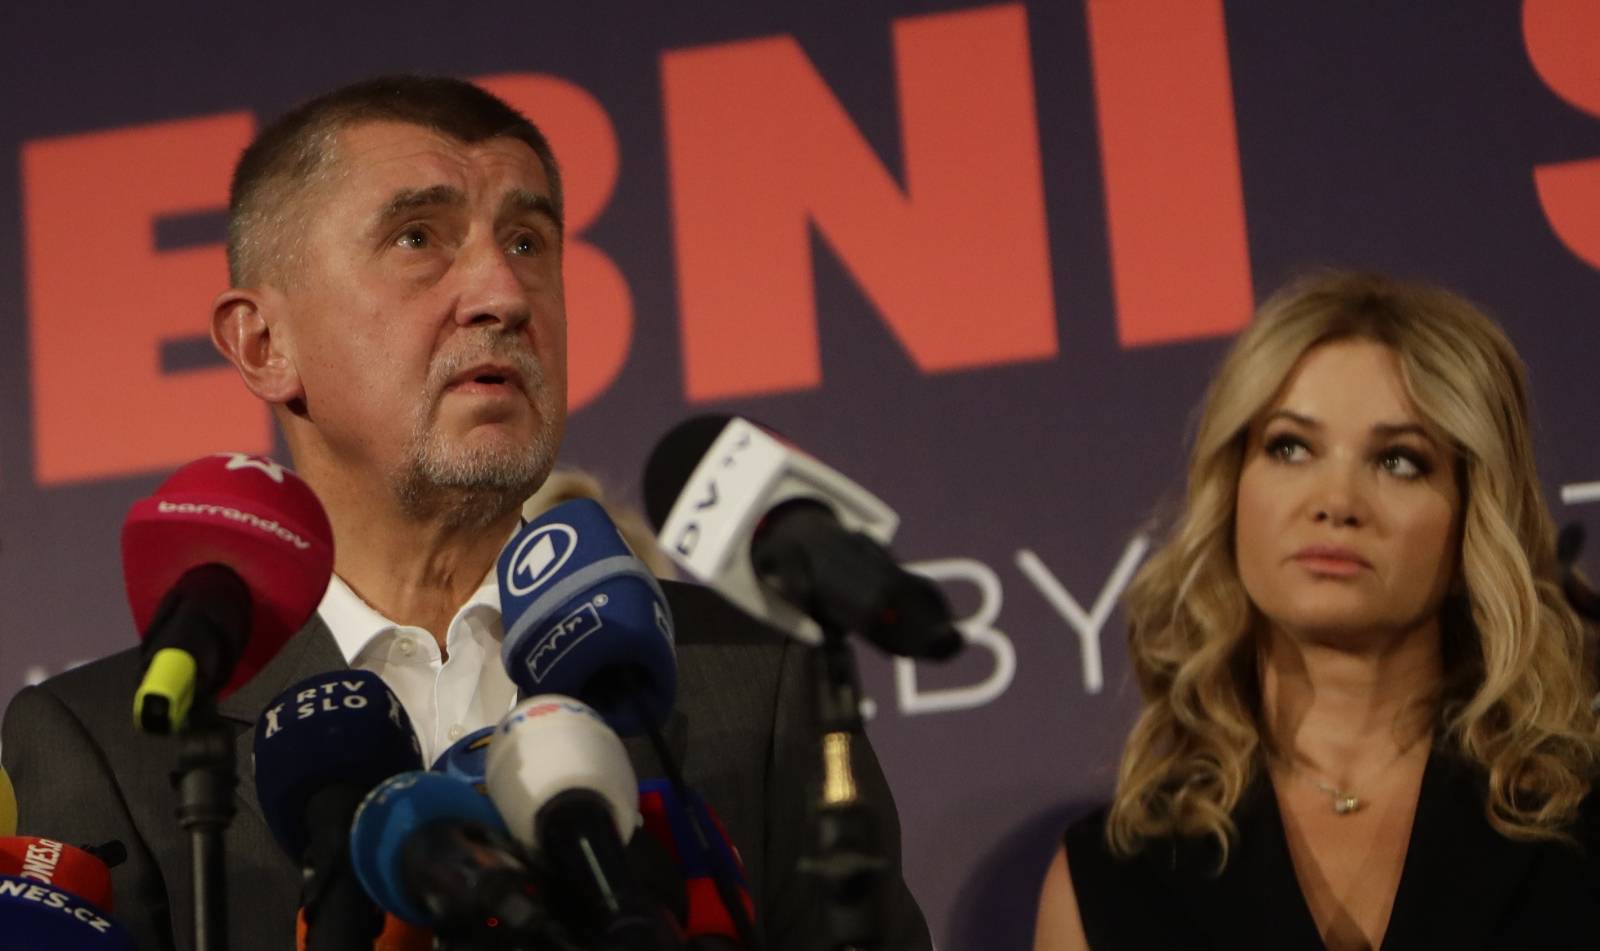 The leader of ANO party Andrej Babis and his wife Monika attend a news conference at the party's election headquarters after the countryâs parliamentary elections in Prague